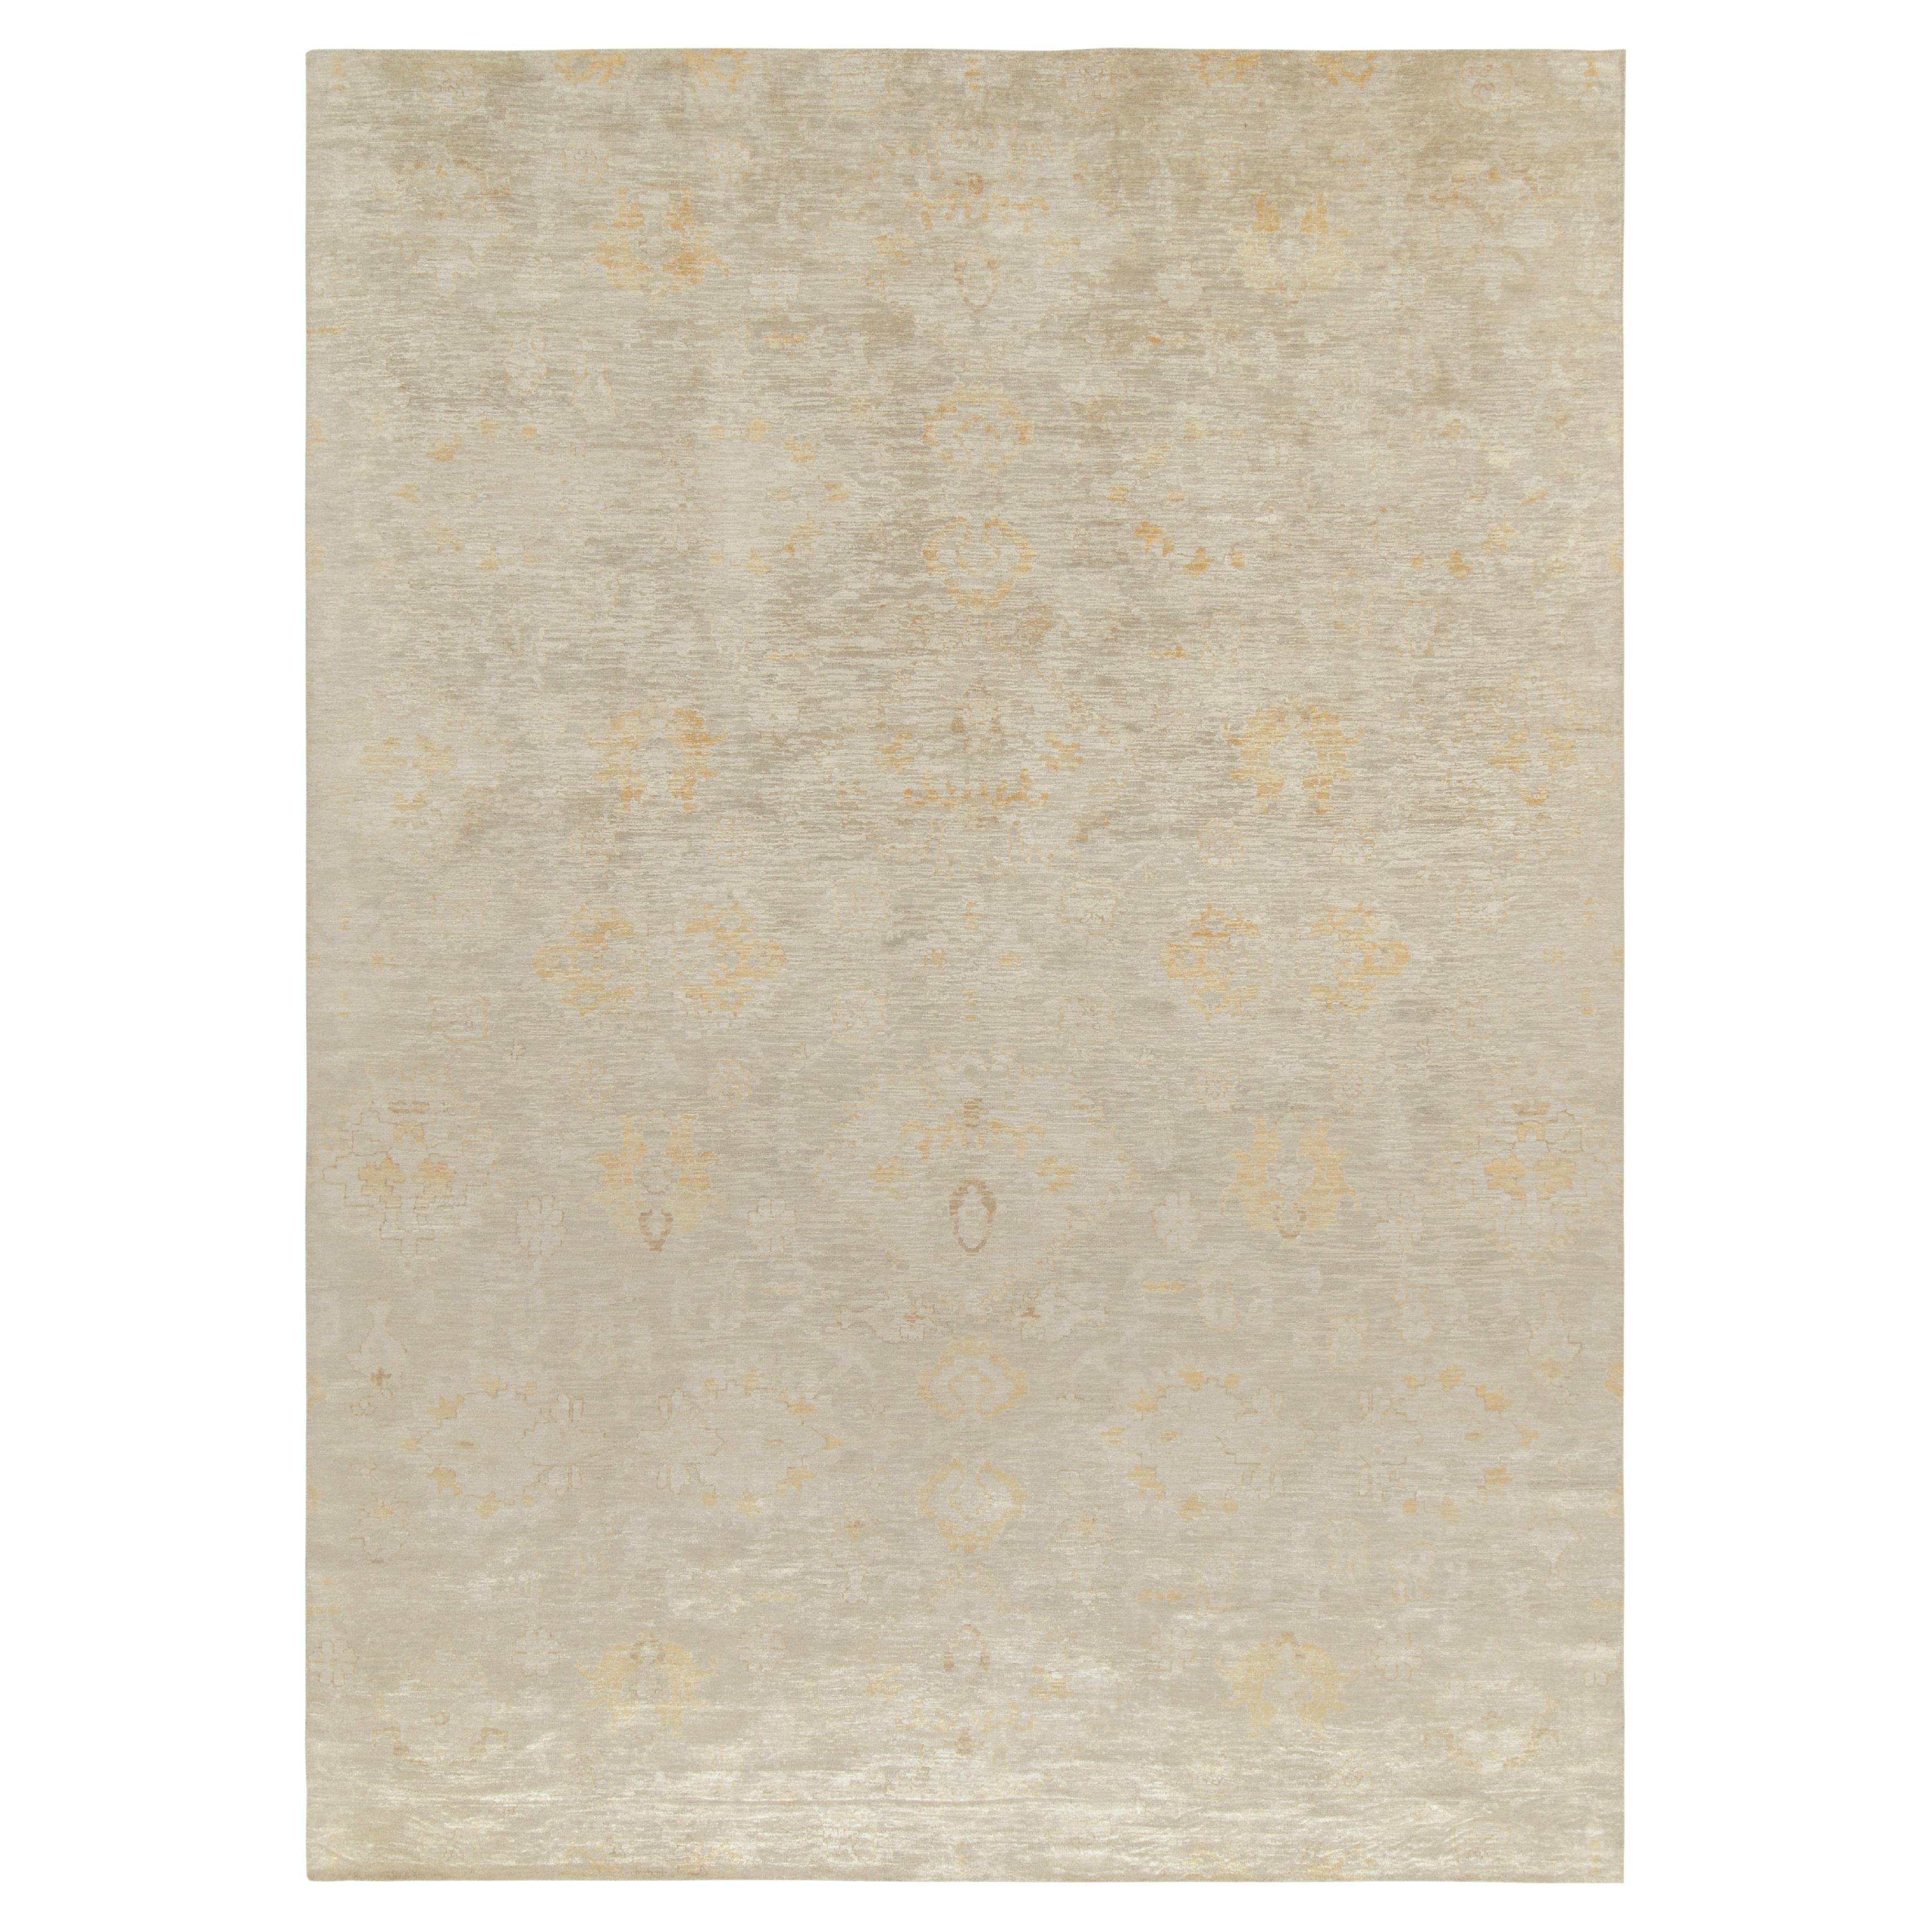 Rug & Kilim’s Contemporary Abstract Rug in Off-White, Beige and Gold Florals For Sale